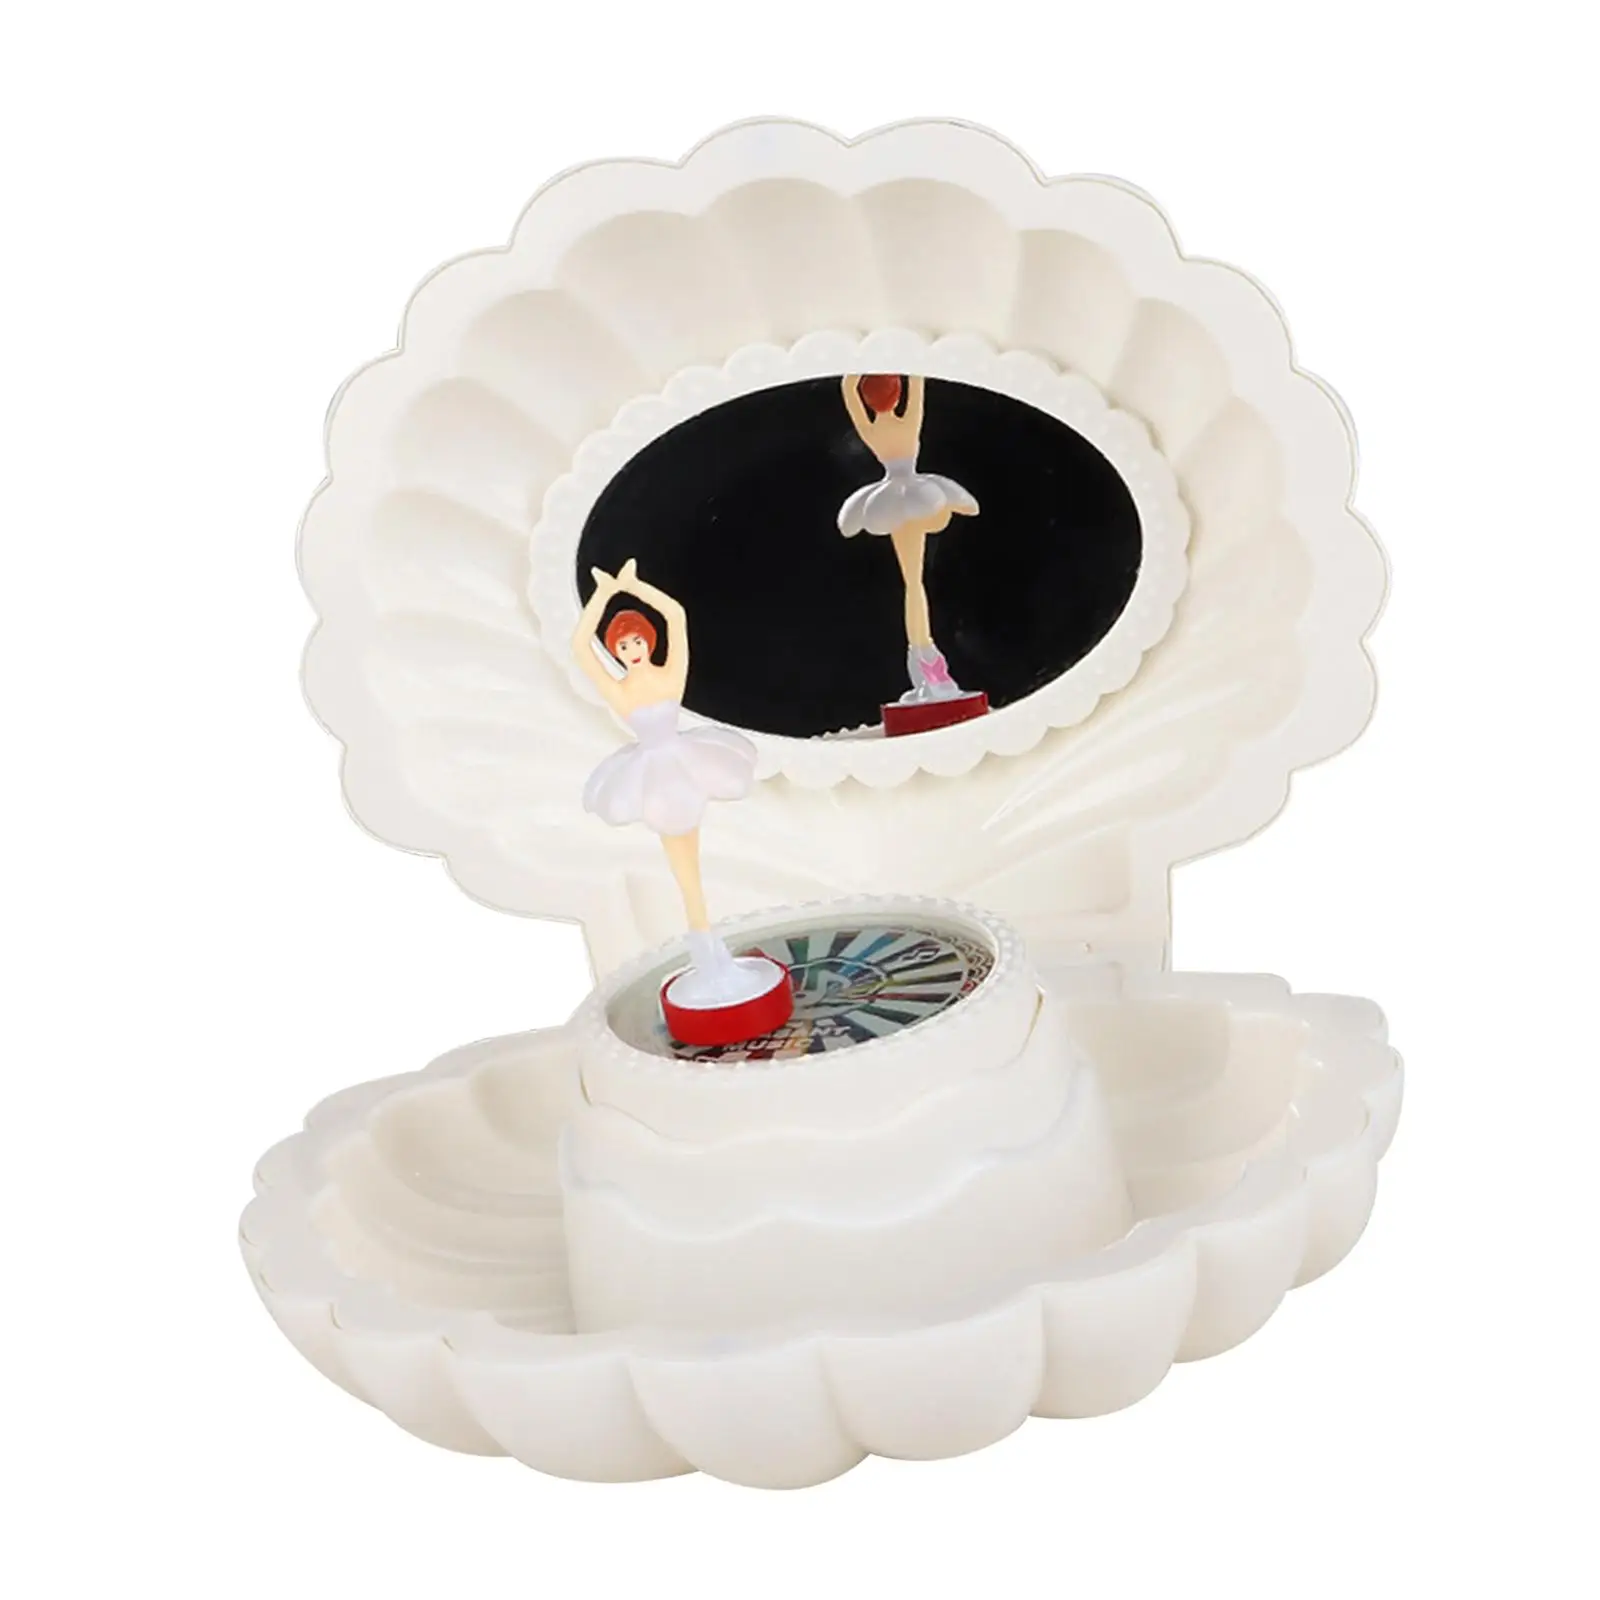 Wind up Musical Boxes Trinket Jewelry Box and Mirror Shell Shaped Ballerina Storage Case for Children Gift Holidays Decorative